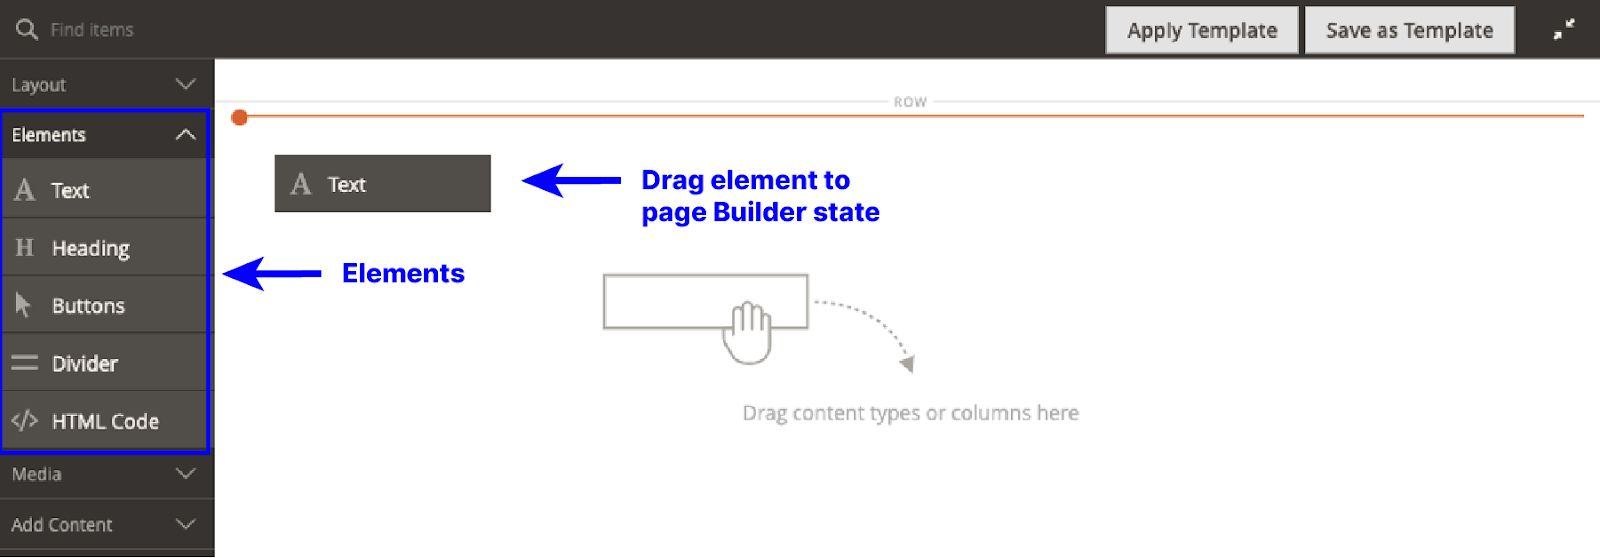 Dragging and dropping elements to the Page Builder stage.